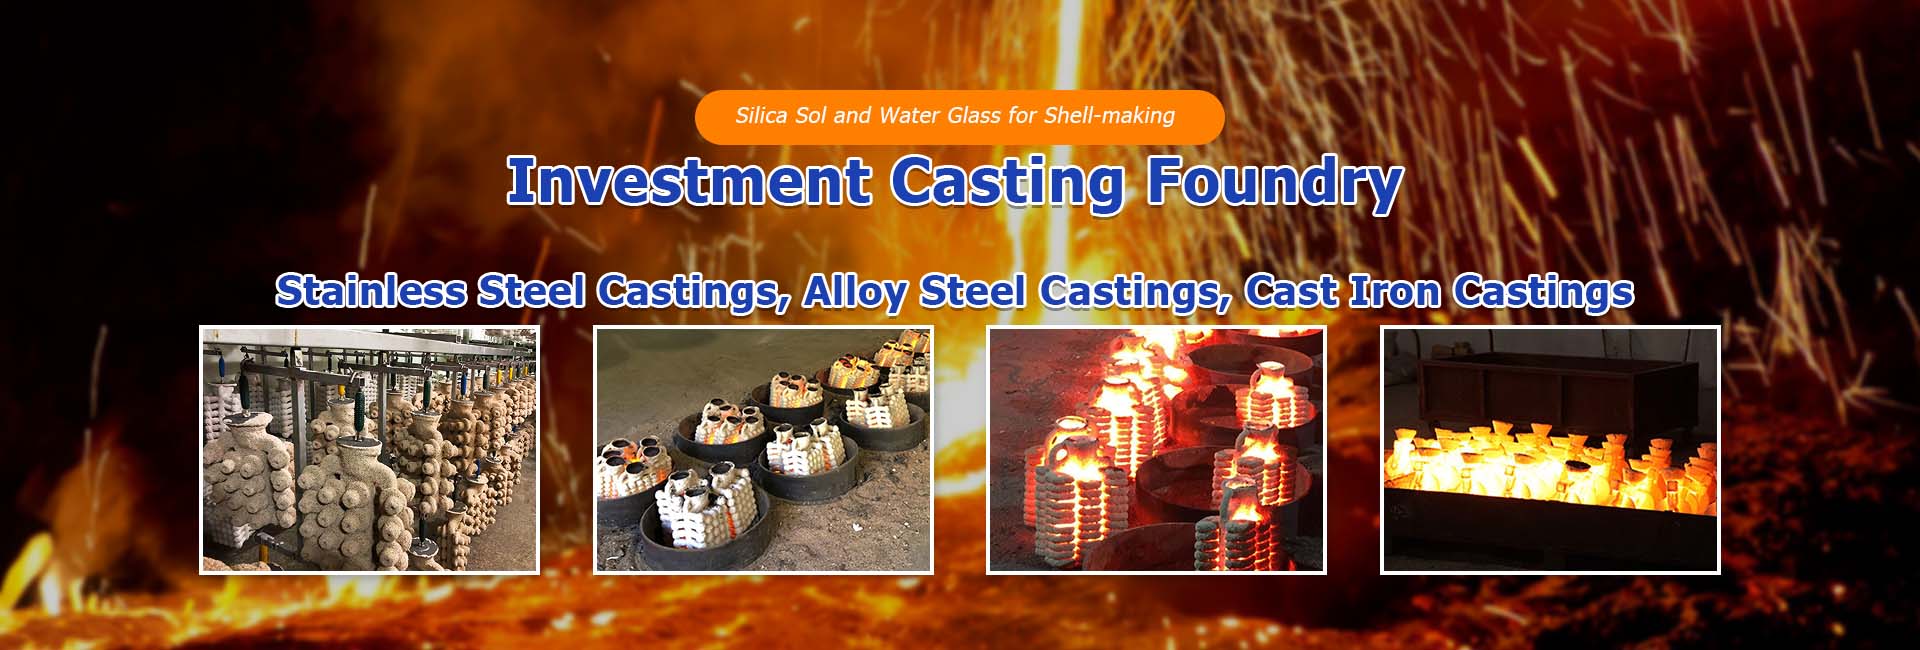 Stainless Steel Lost Wax Investment Casting Foundry